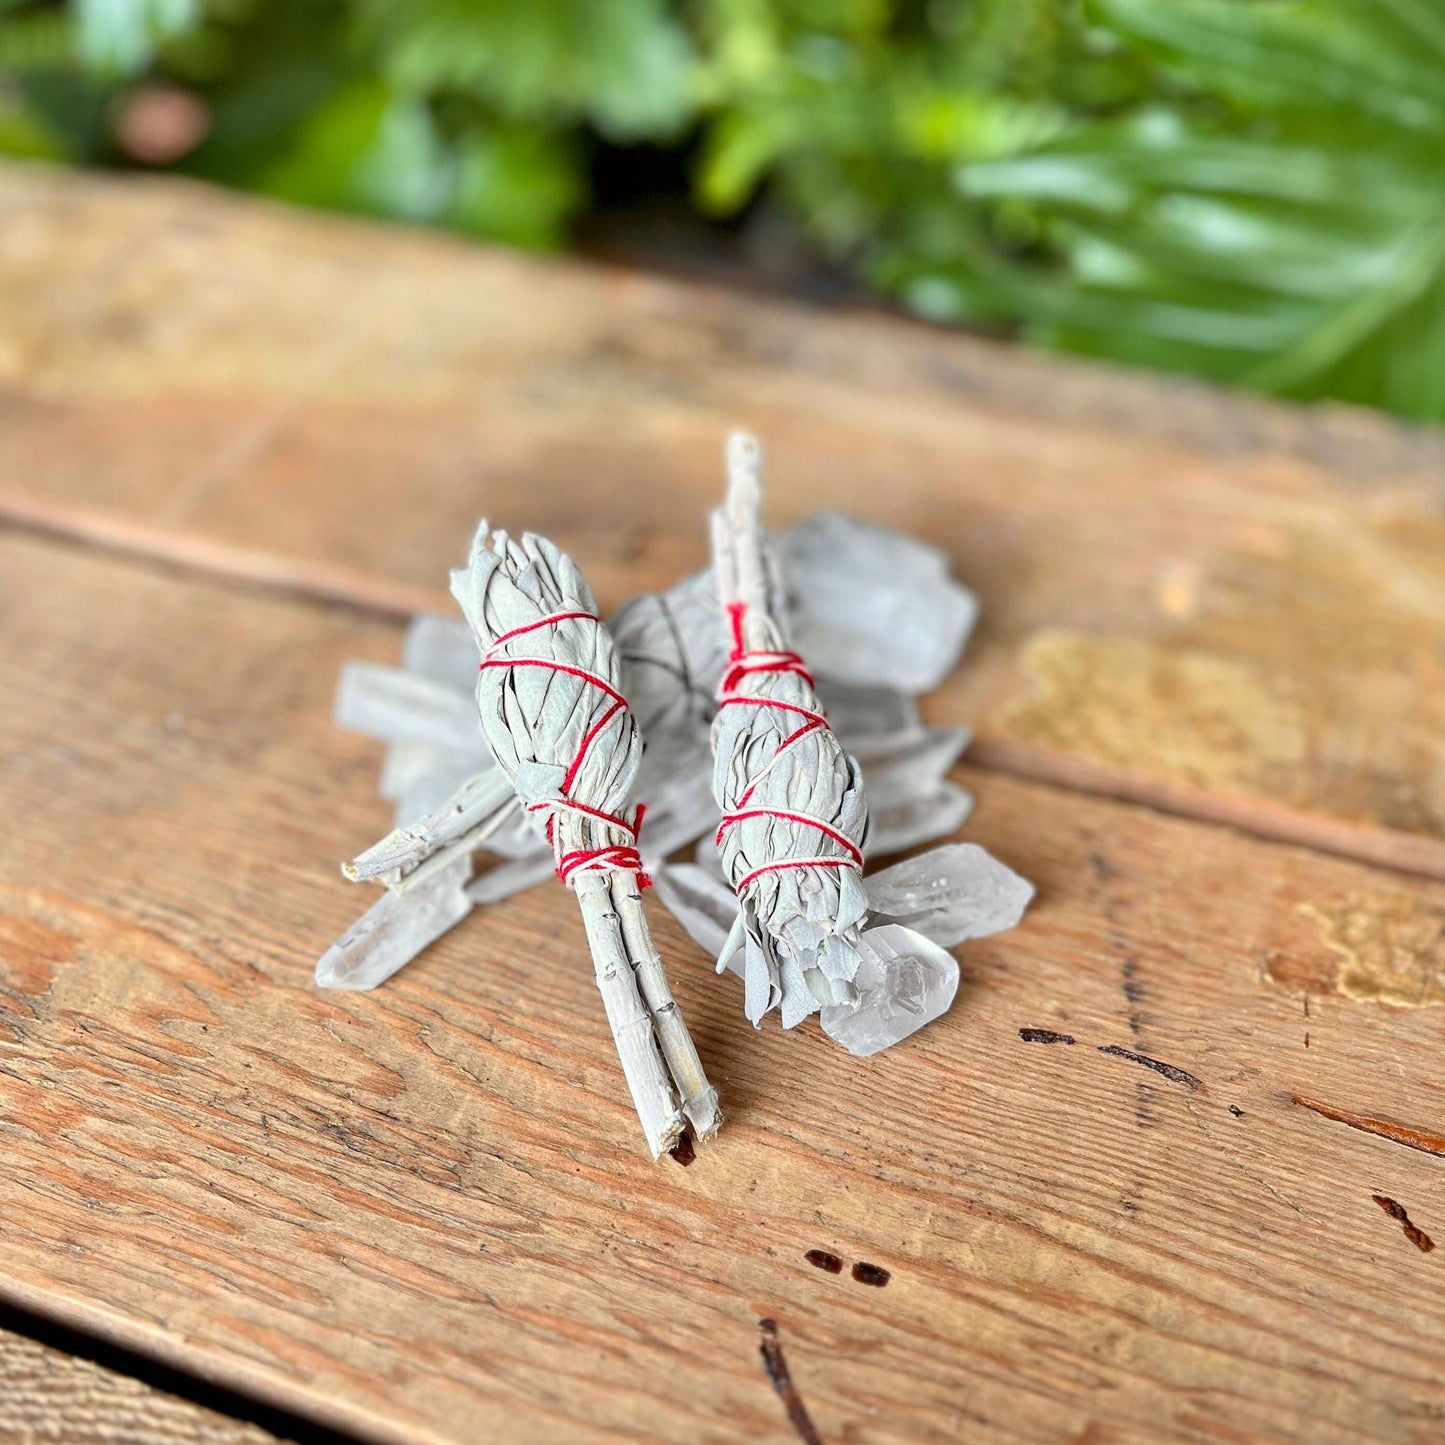 Experience the pure and potent energy of our Tiny White Sage Smudge. Harvested with care, this miniature ceremonial herb is perfect for smaller spaces, travel, or quick energy cleansing rituals. Embrace the sacred essence of White Sage and elevate your spiritual practices with ease.